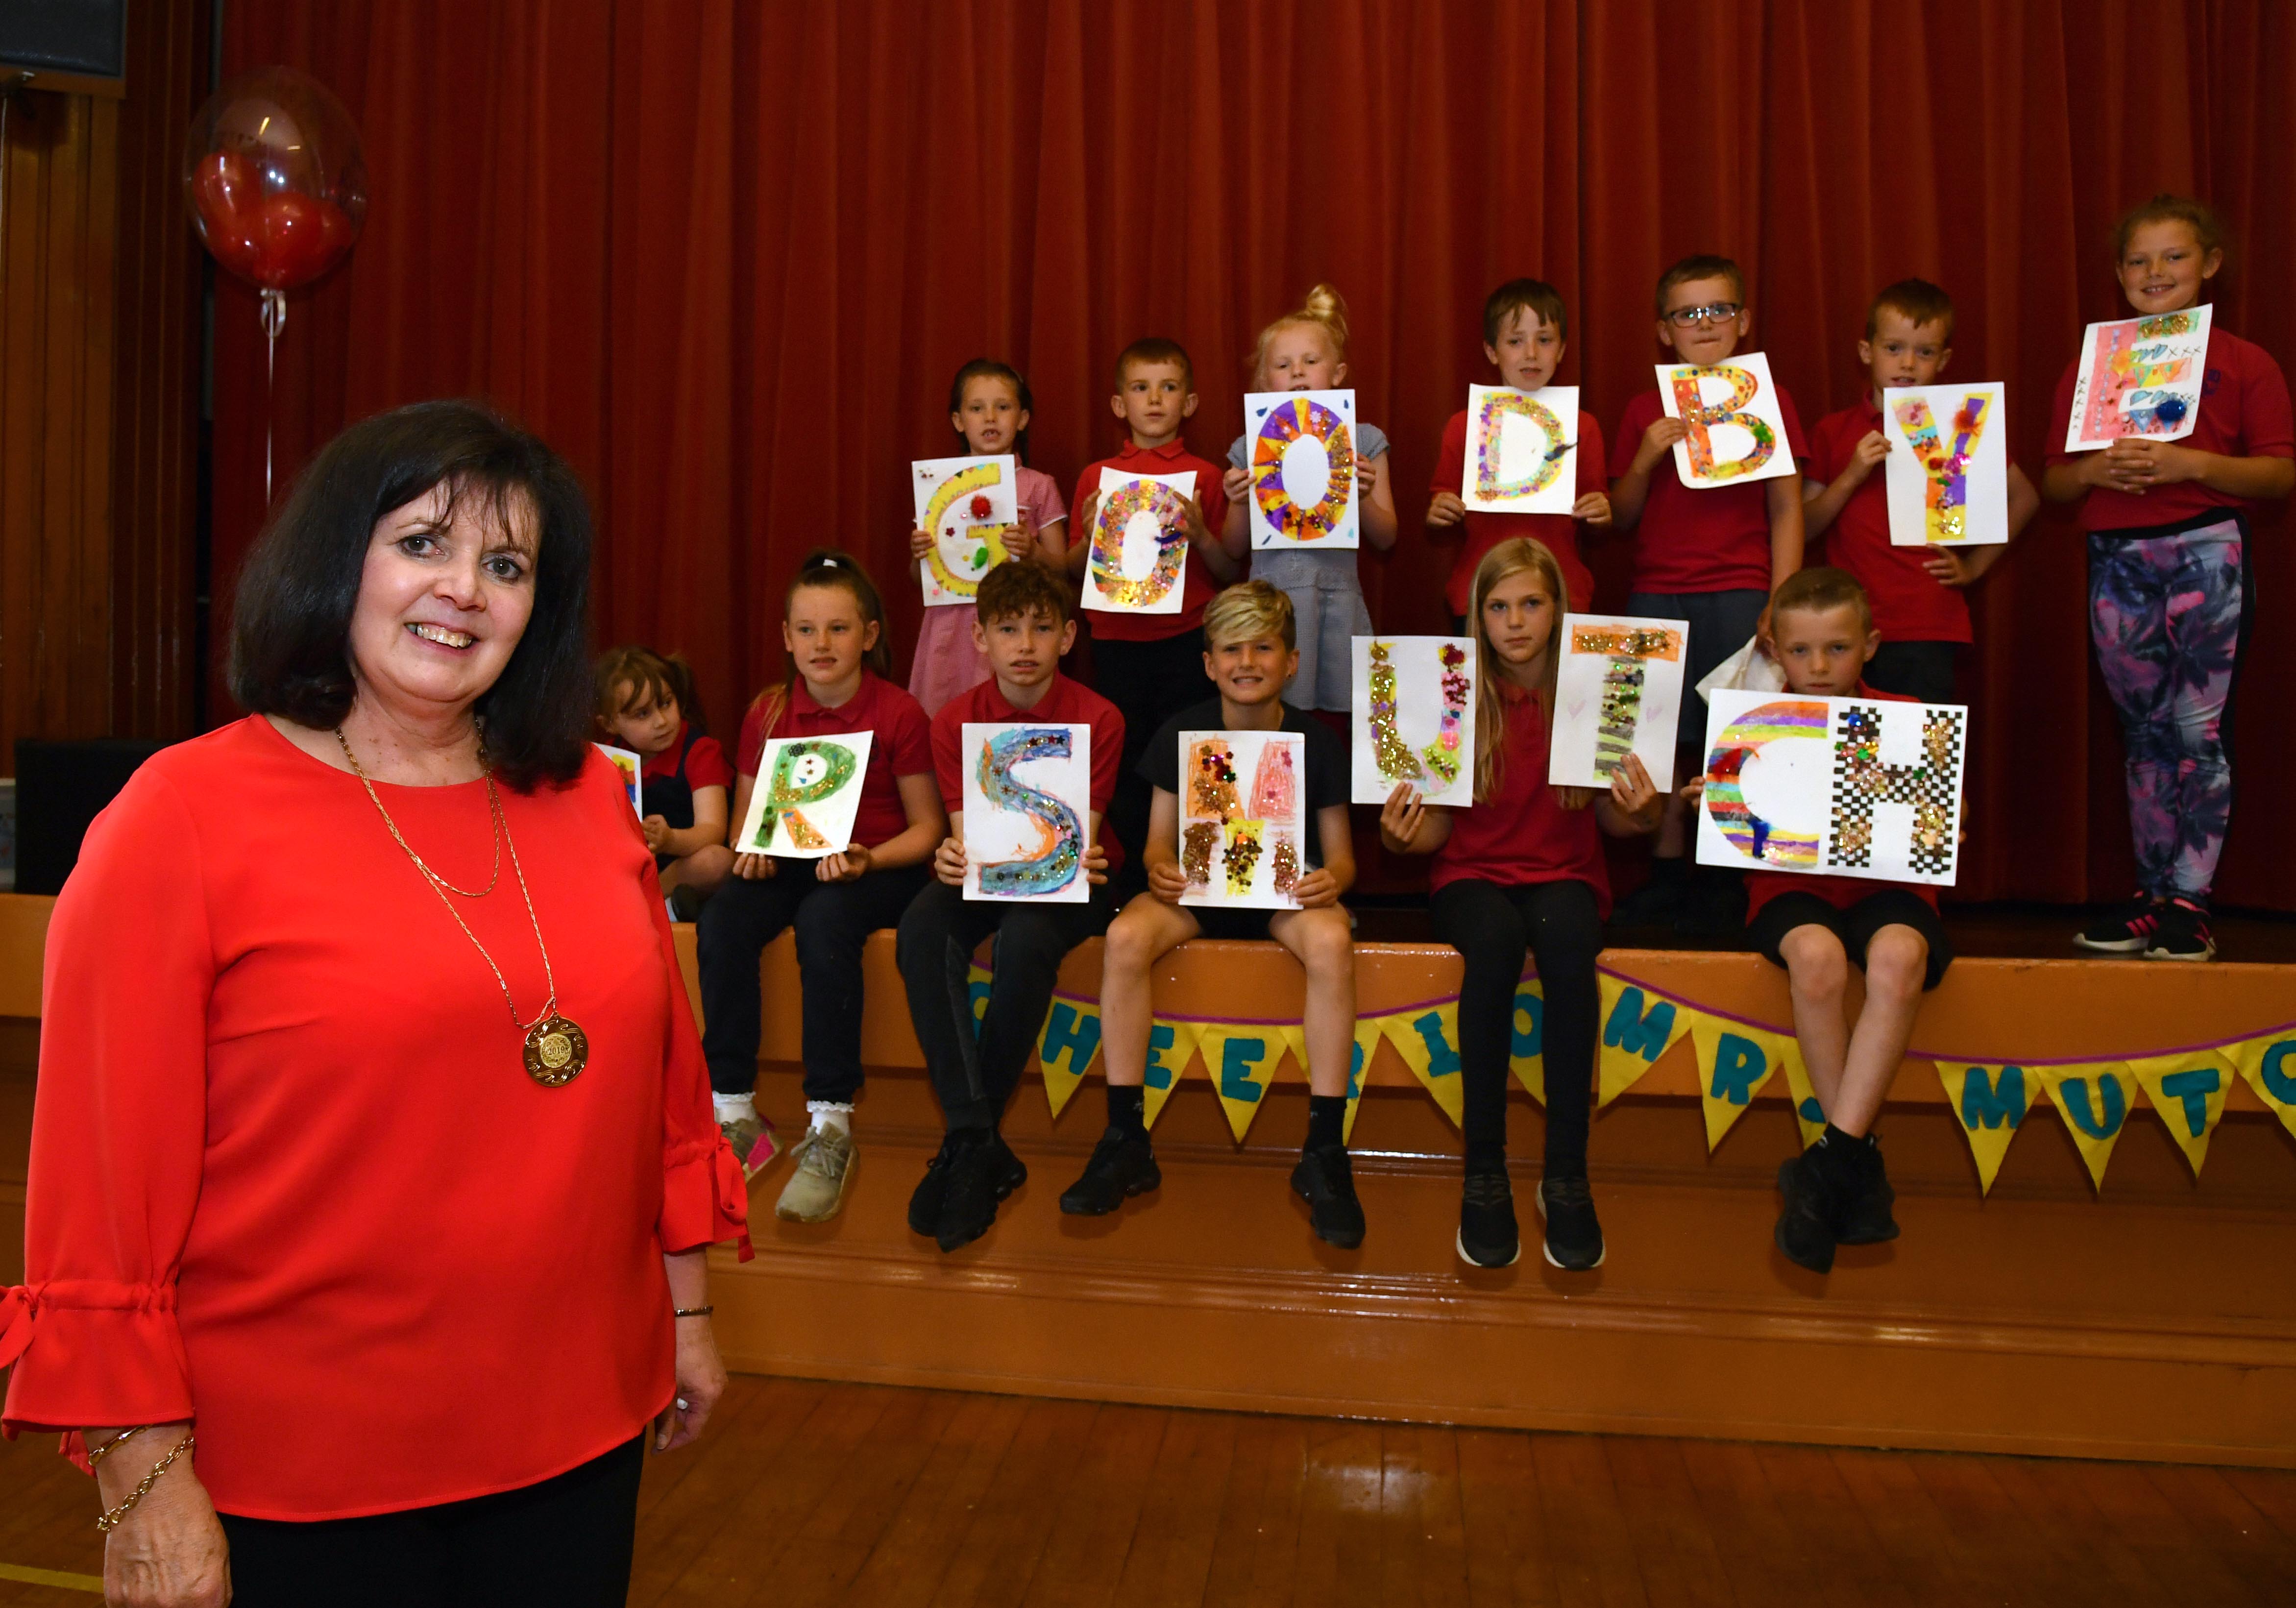 NEW DEER HEAD TEACHER WILMA MUTCH GETS A SEND OFF FROM HER PUPILS AFTER 40 YEARS OF SERVICE